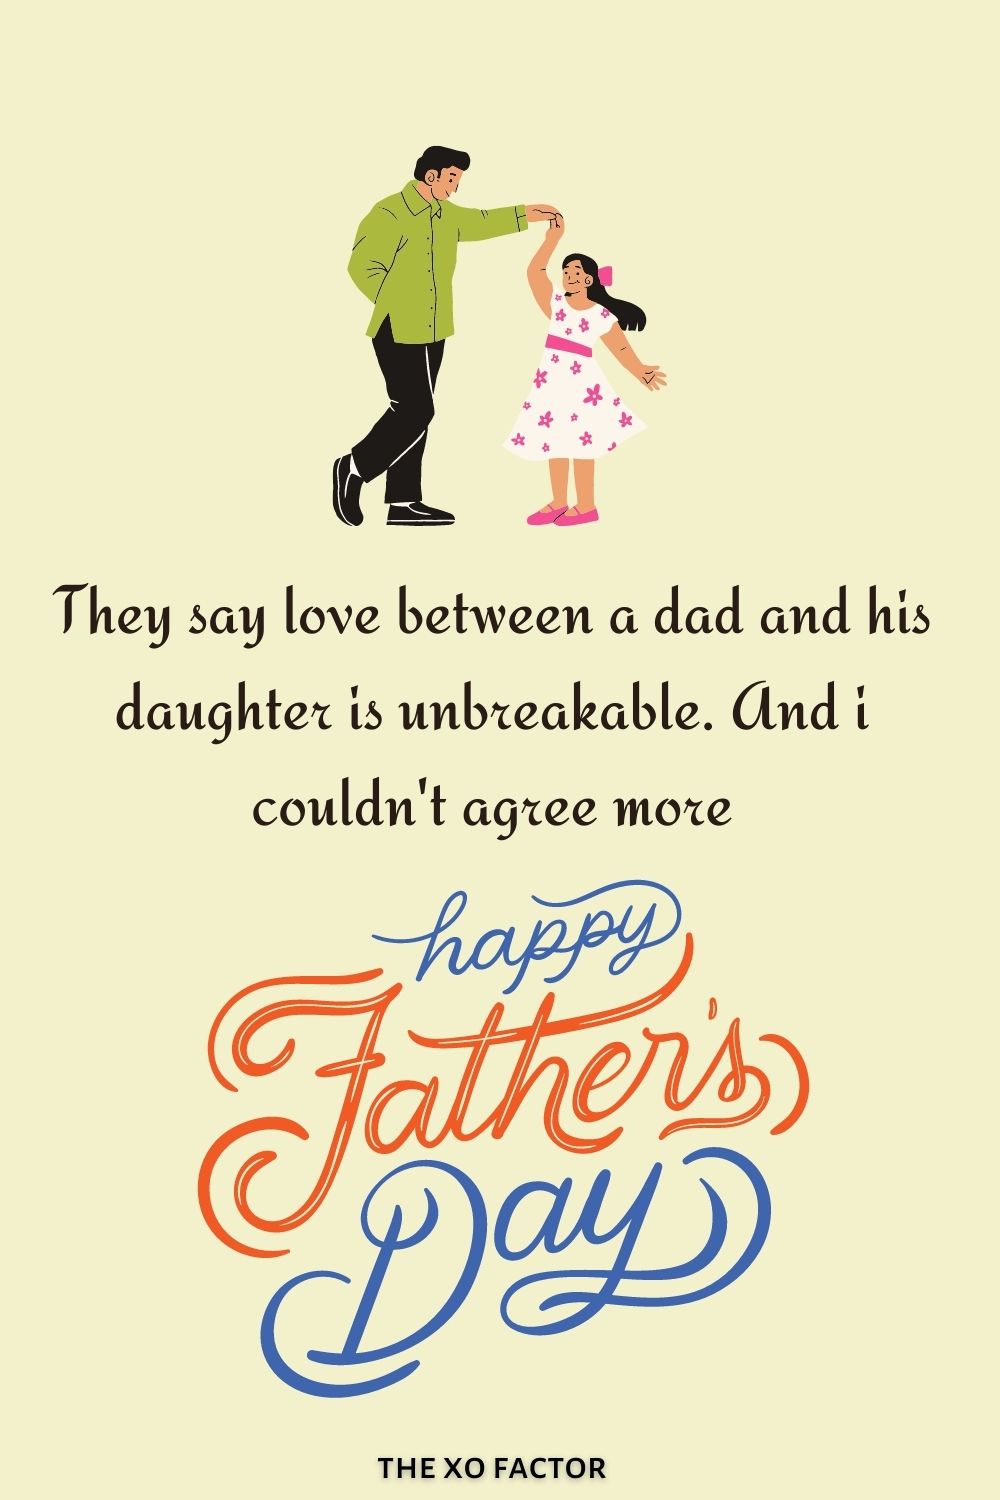 They say love between a dad and his daughter is unbreakable. And i couldn't agree more, Happy Father's Day Dad